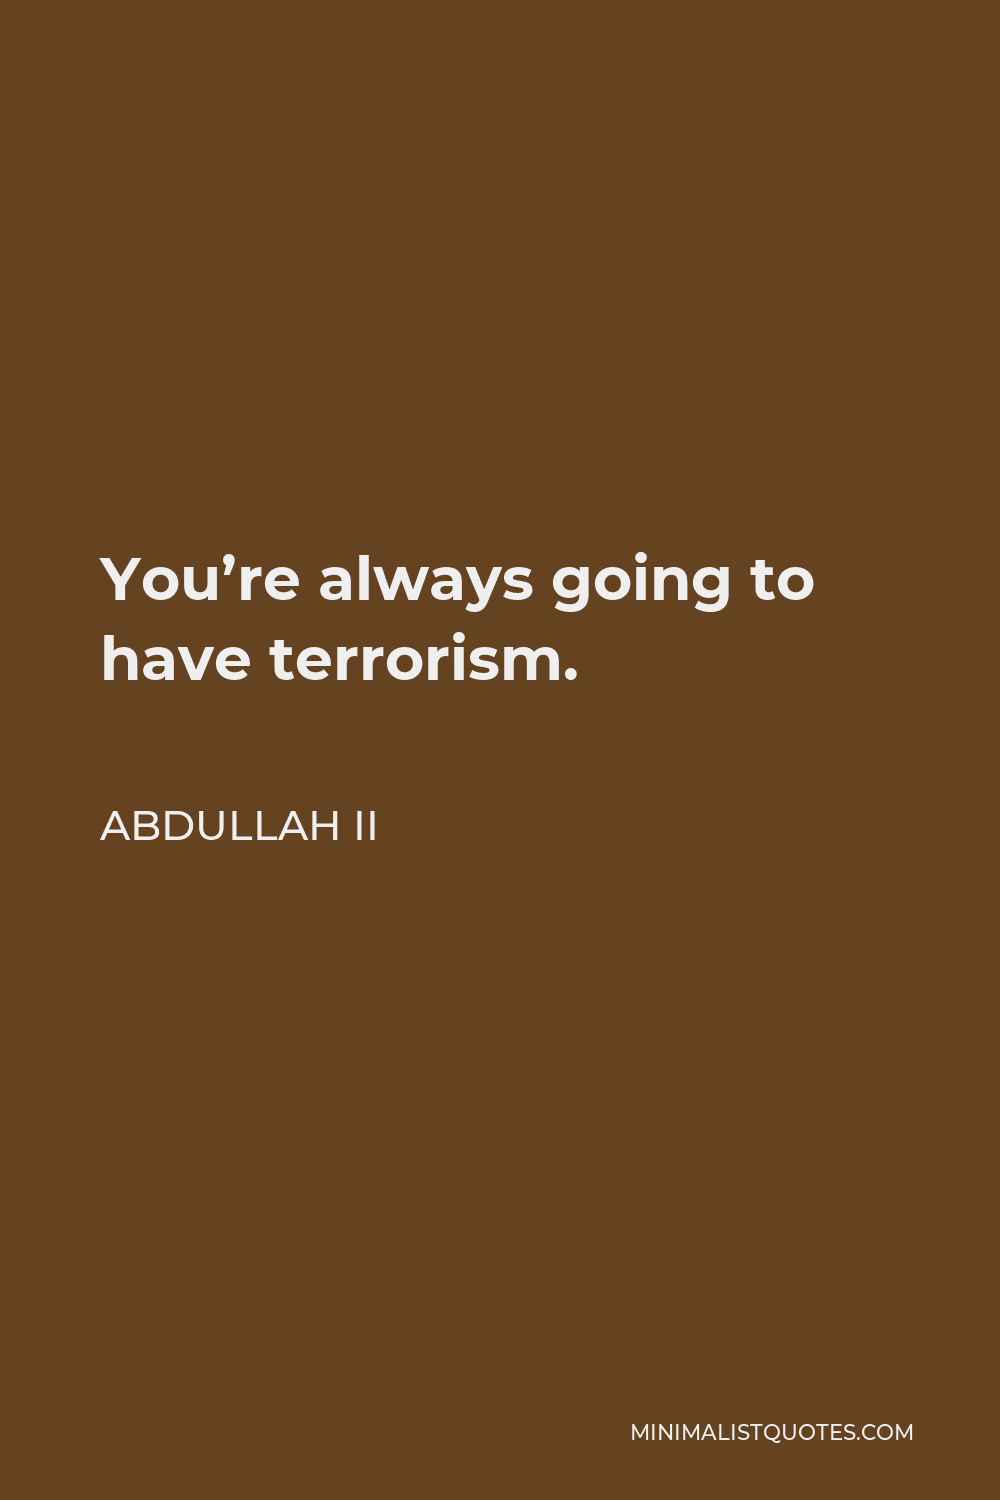 Abdullah II Quote - You’re always going to have terrorism.